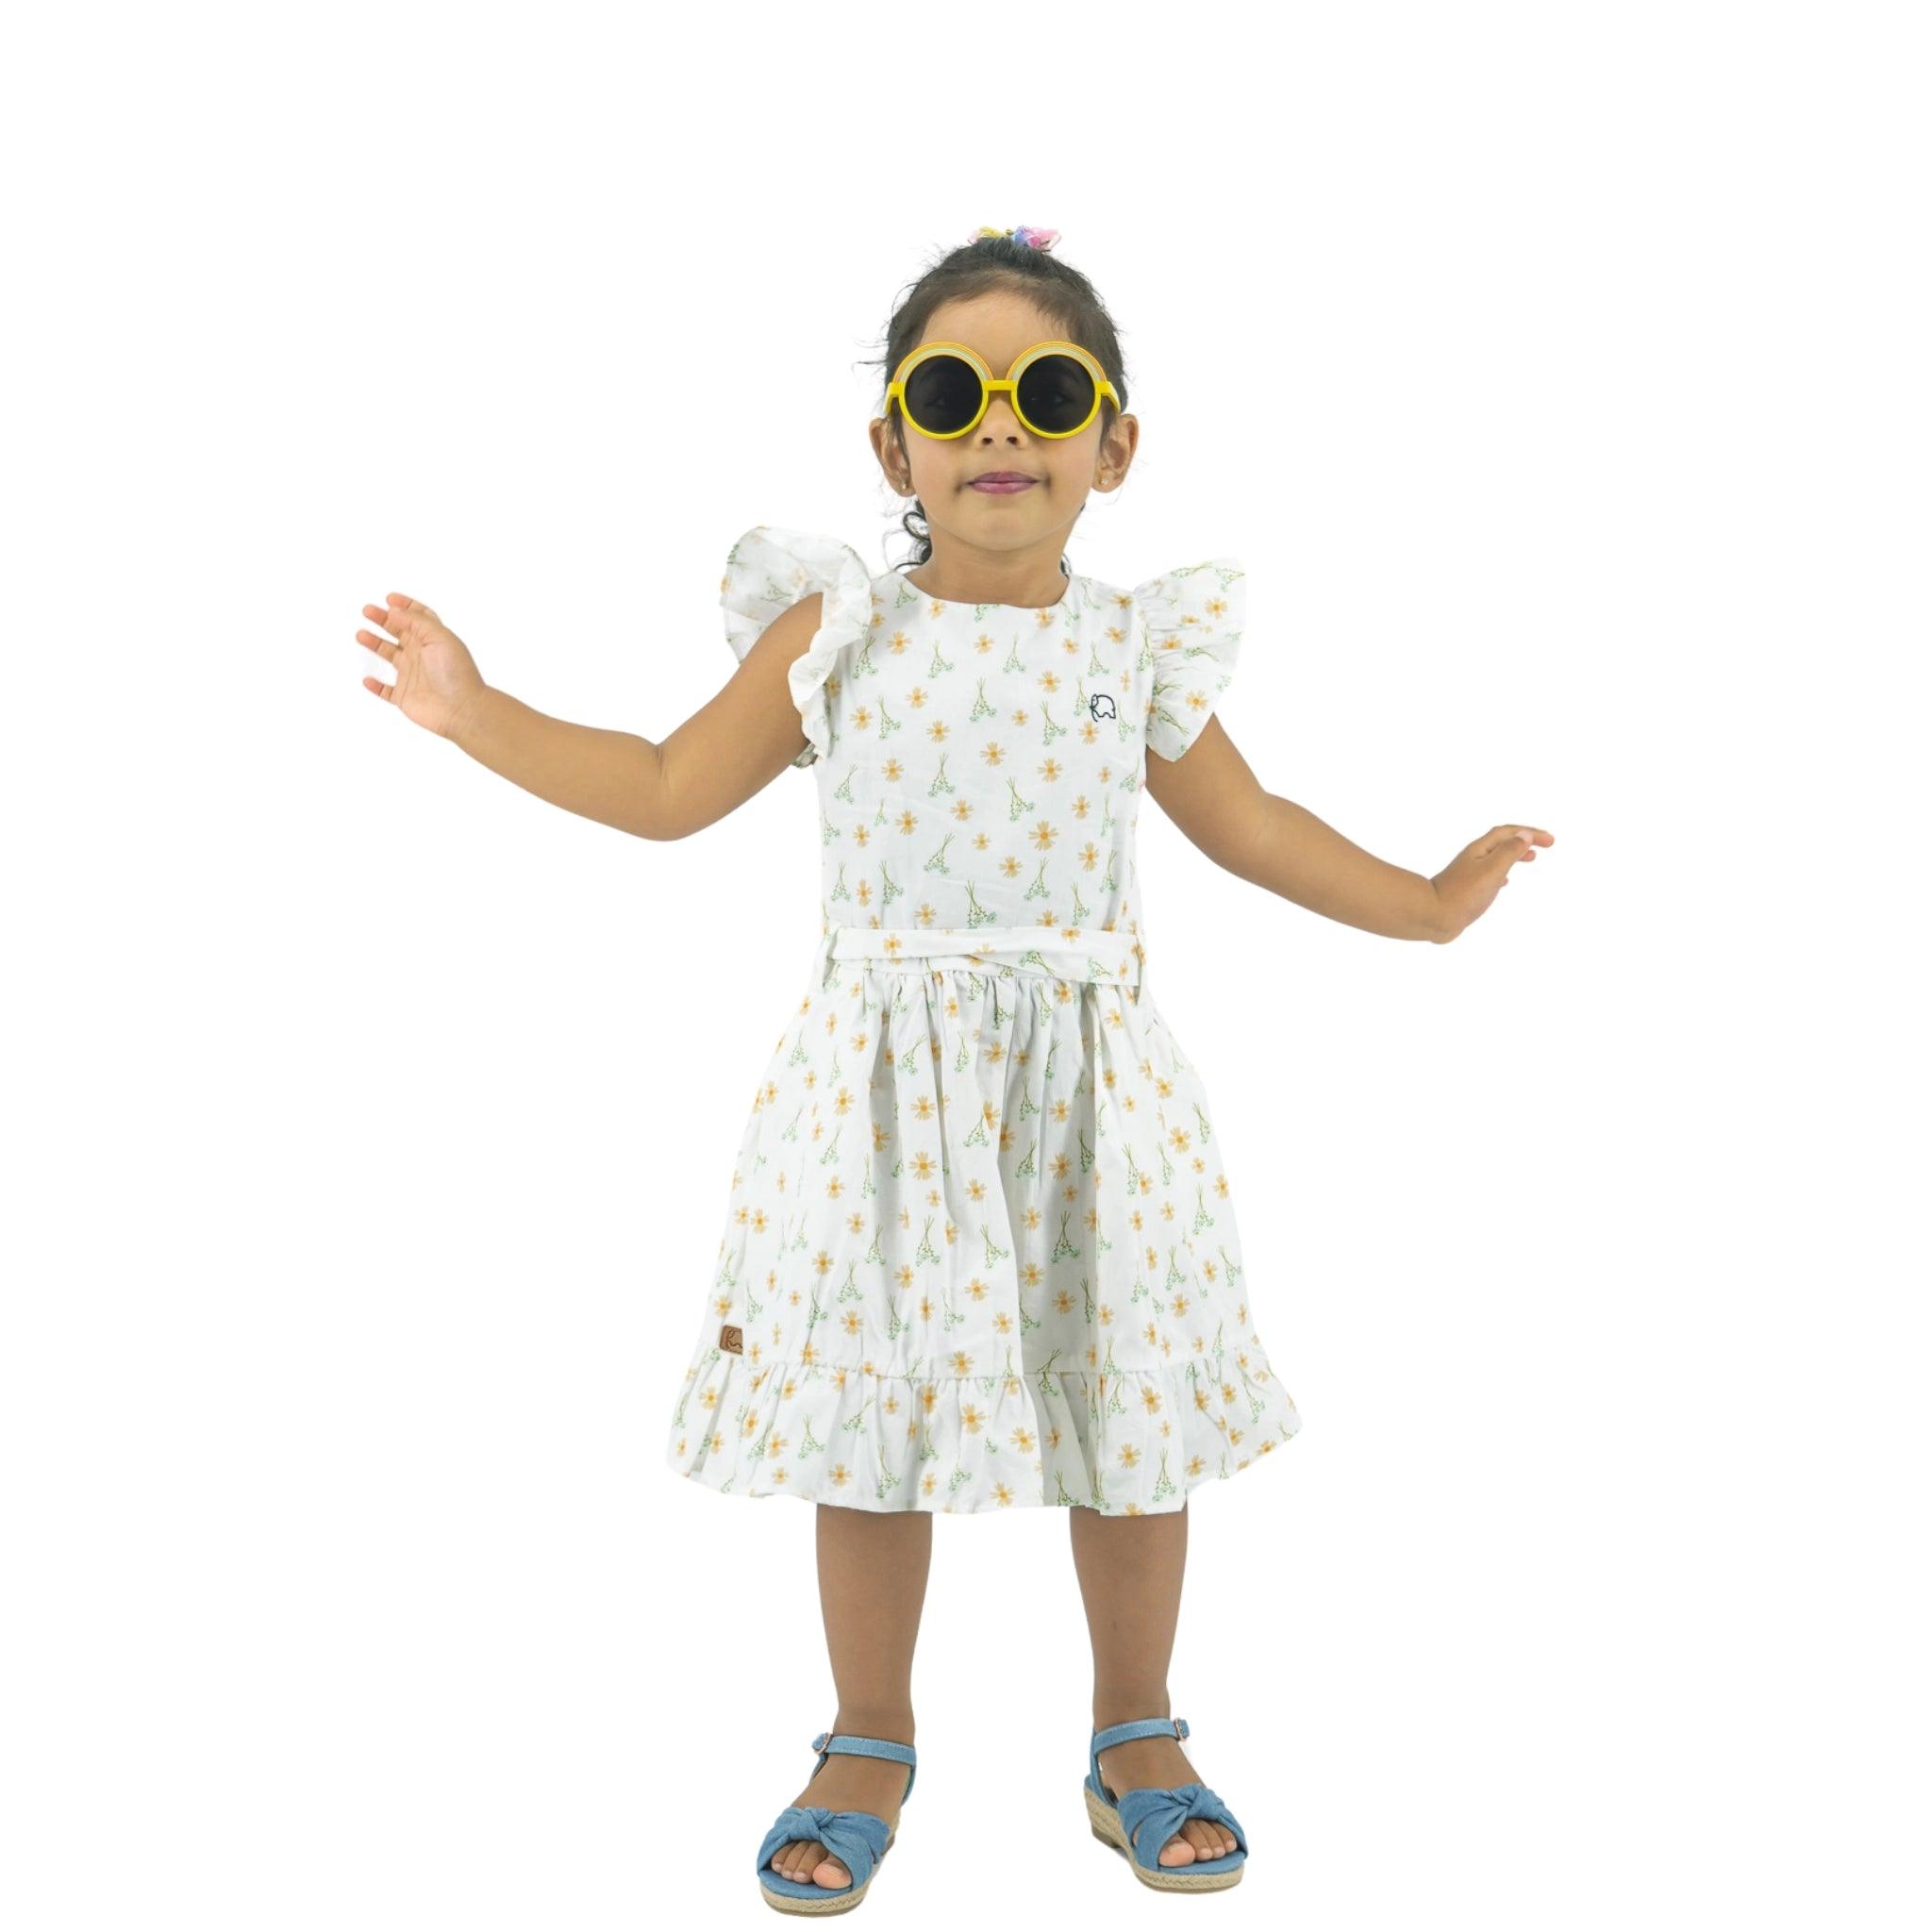 A young girl wearing a Karee Petite Blossom Cotton Dress in Smoked Pearl and sunglasses stands with her arms outstretched, isolated on a white background.